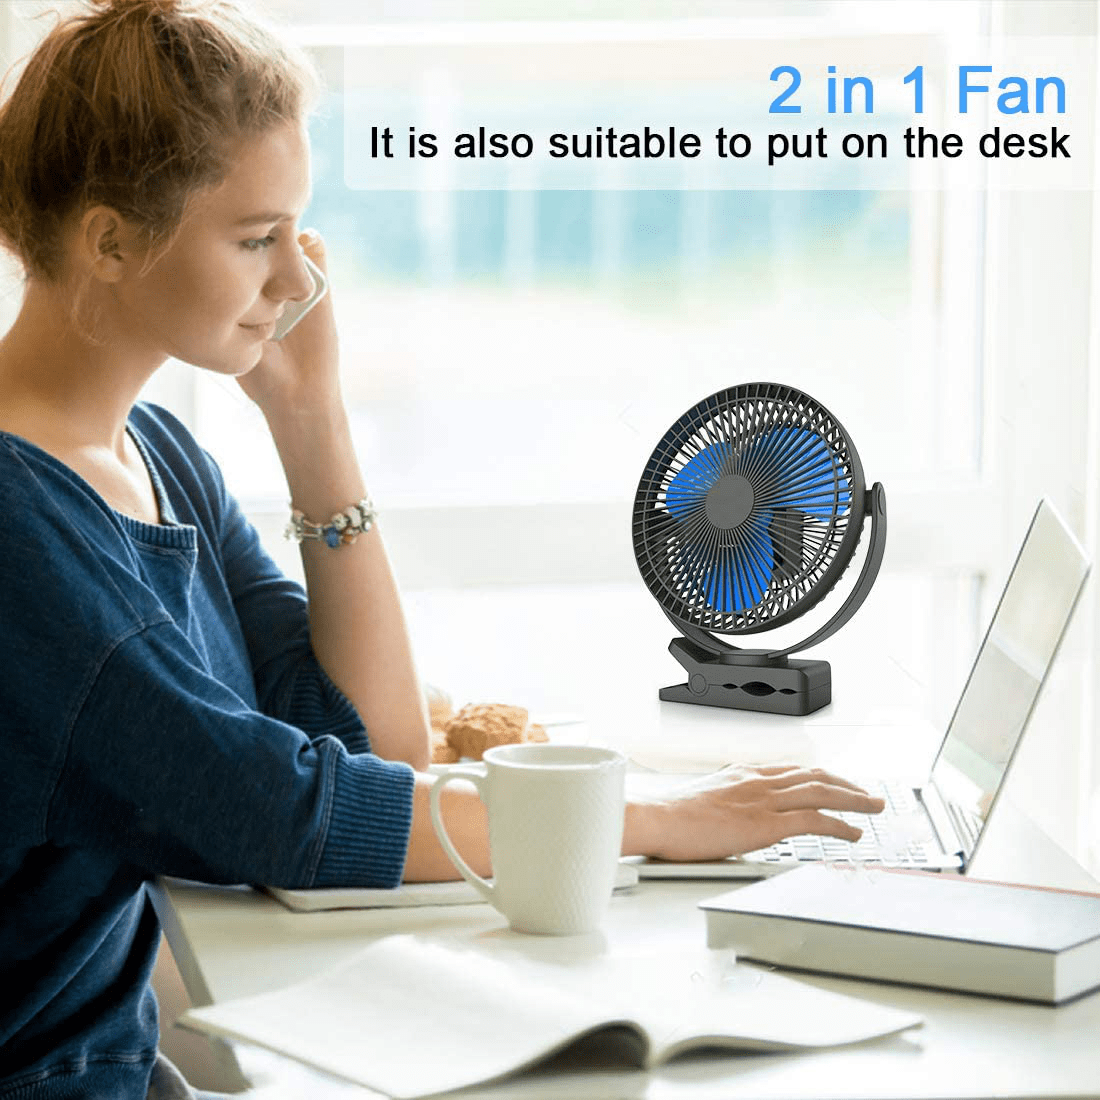 10000Mah Rechargeable Portable Fan, 8-Inch Battery Operated Clip on Fan, USB Fan, 4 Speeds, Strong Airflow, Sturdy Clamp for Personal Office Desk Golf Car Outdoor Travel Camping Tent Gym Treadmill